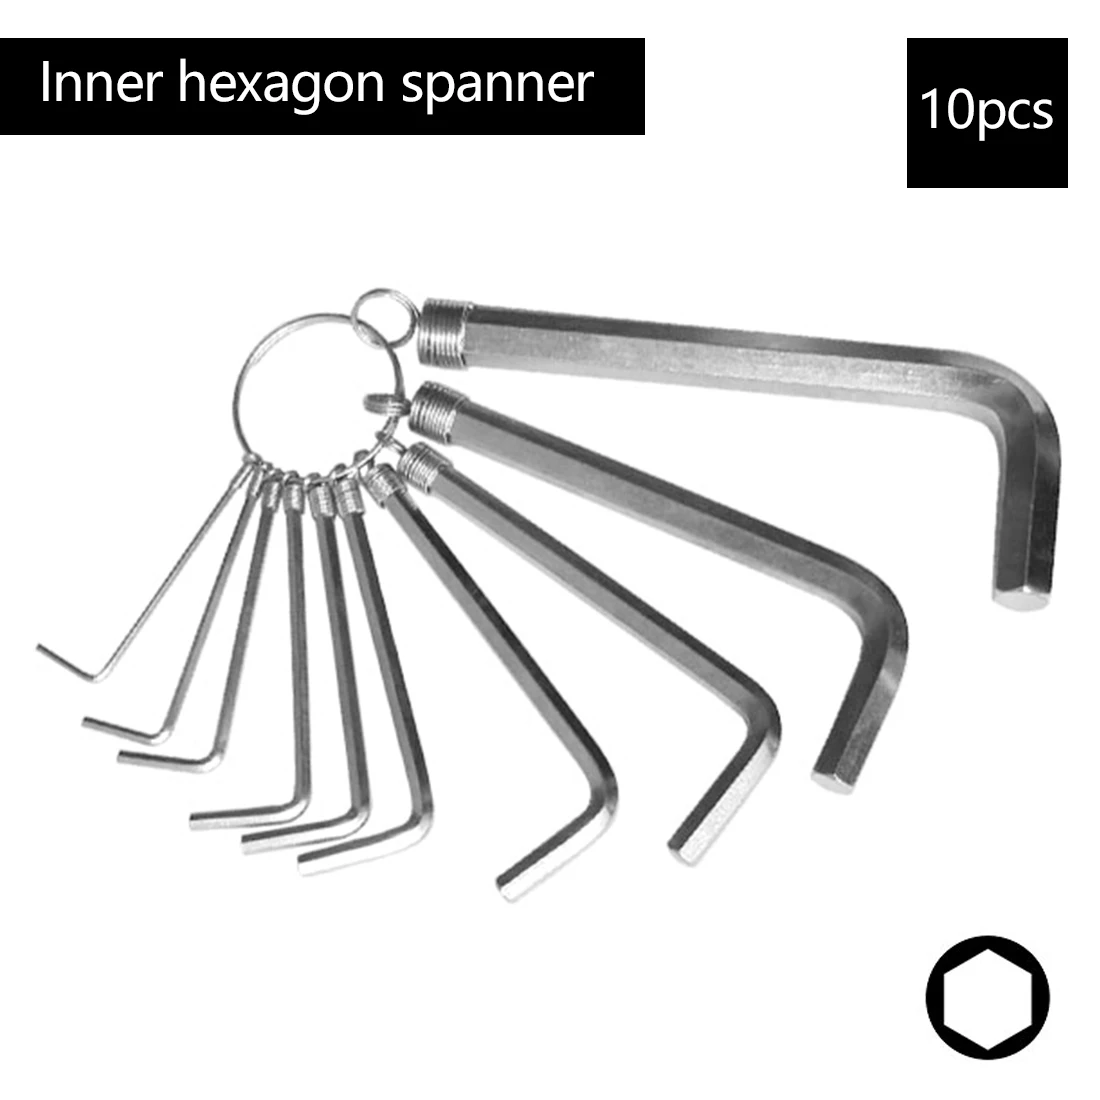 10 Pcs Hex Allen Key Wrench Set Metric Combination 1.5mm to 10mm Hand Tool